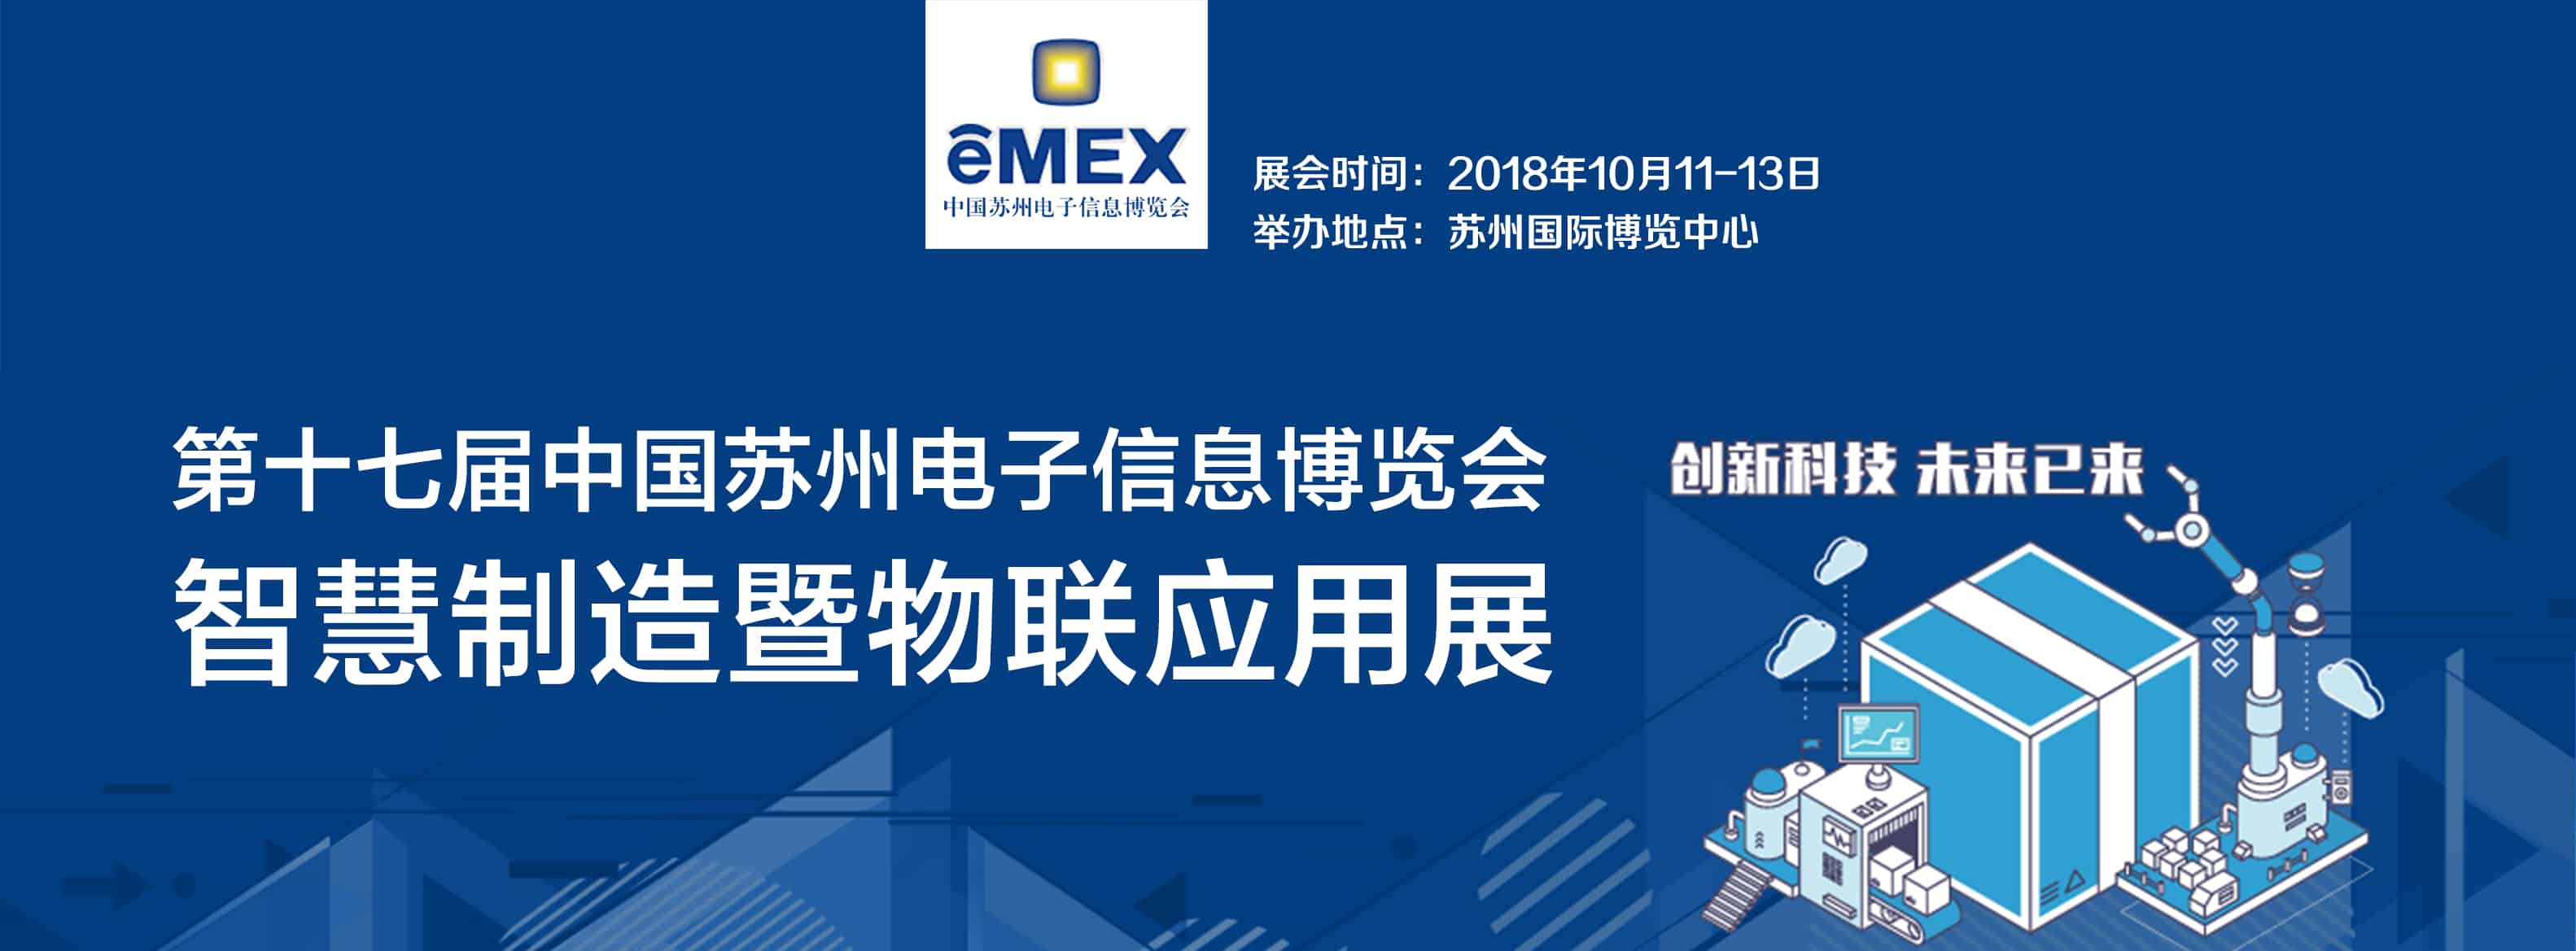 eMEX Smart Manufacturing and IoT Application Exhibition 2018